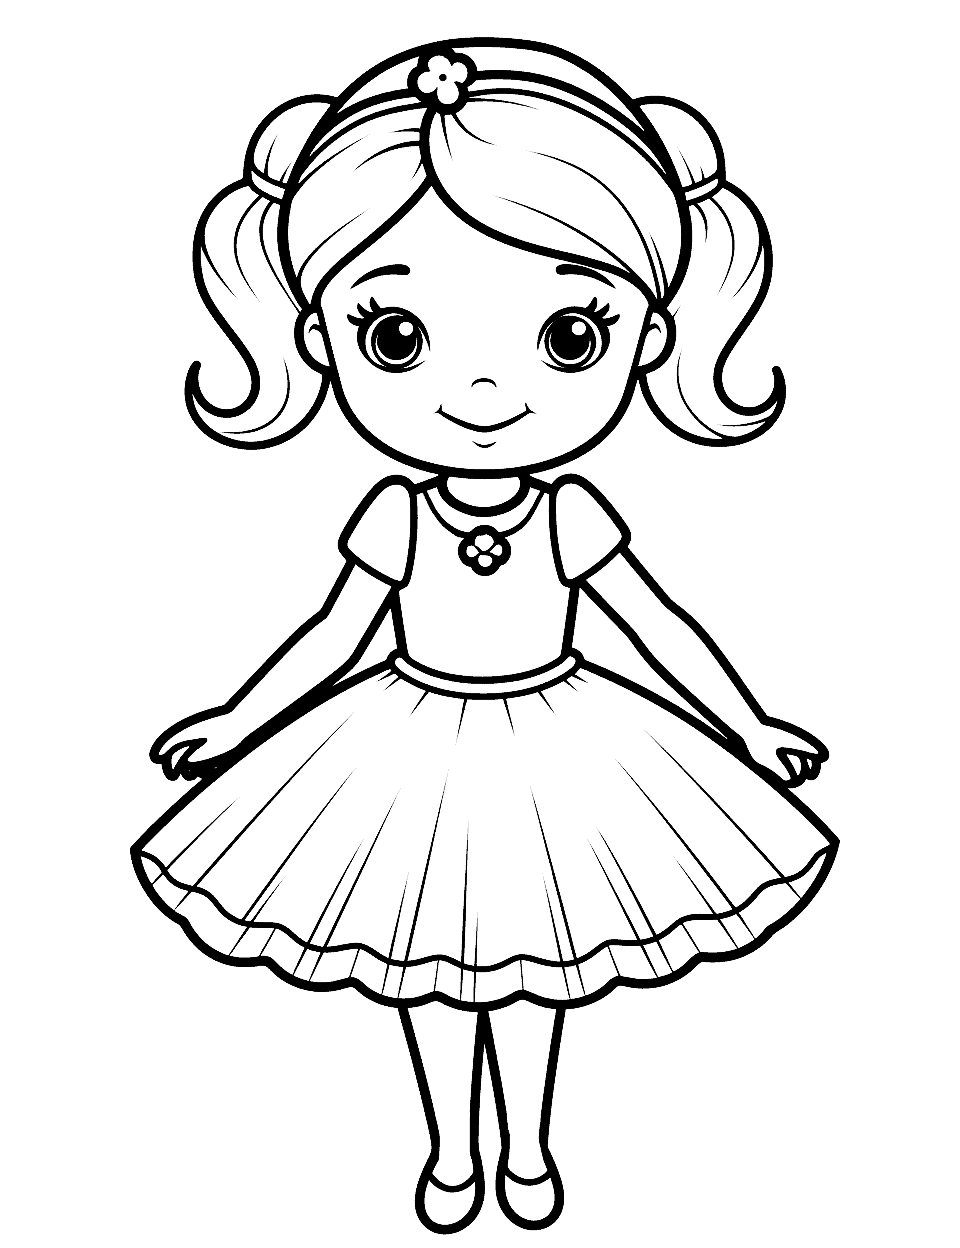 Little Ballerina Coloring Page - A cute girl dressed in a tiny ballerina outfit.